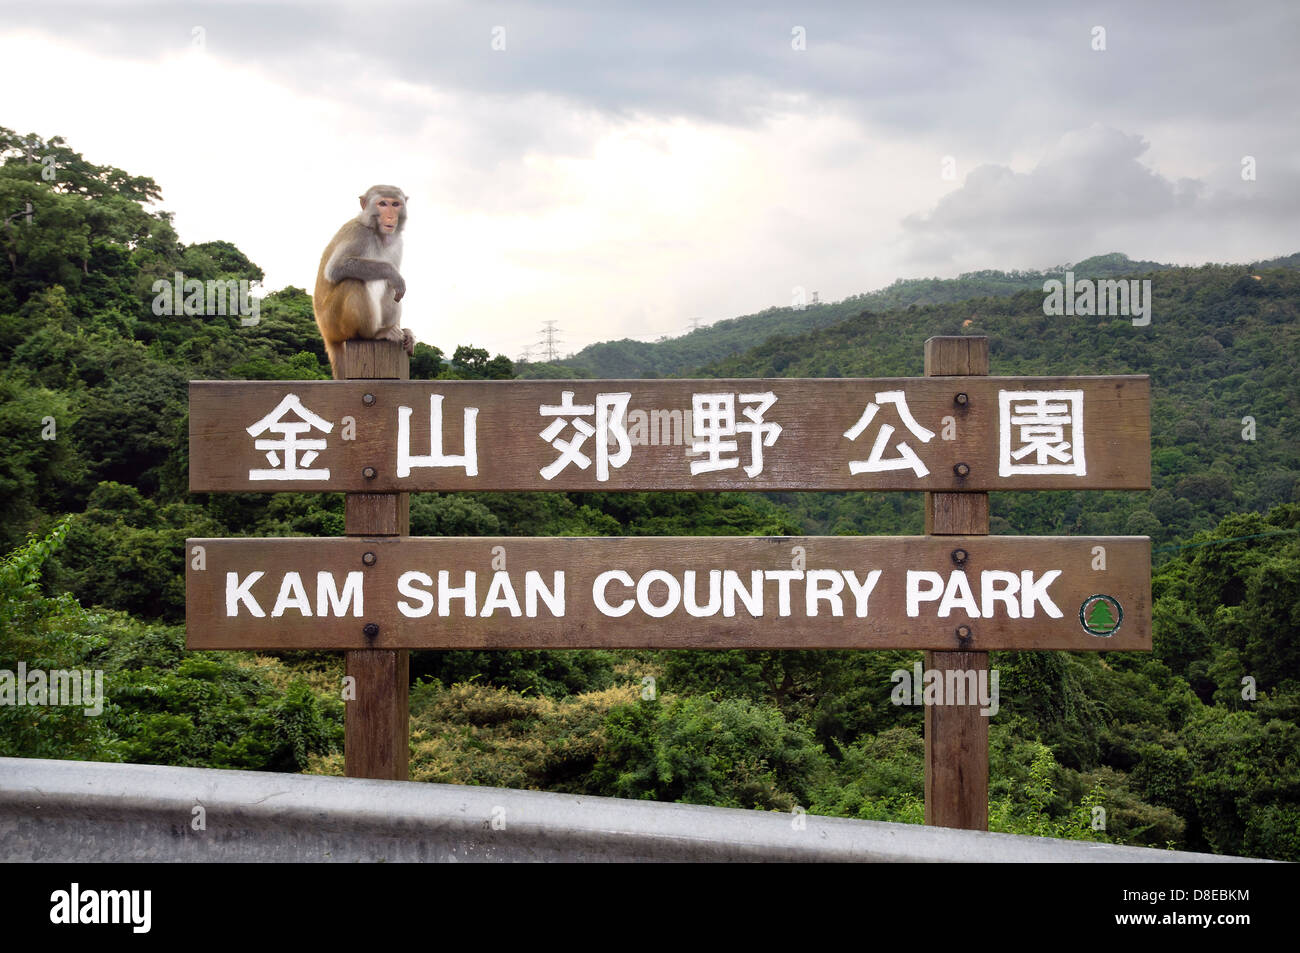 Kam Shan Country Park, also known as Monkey Mountain, Hong Kong Stock Photo